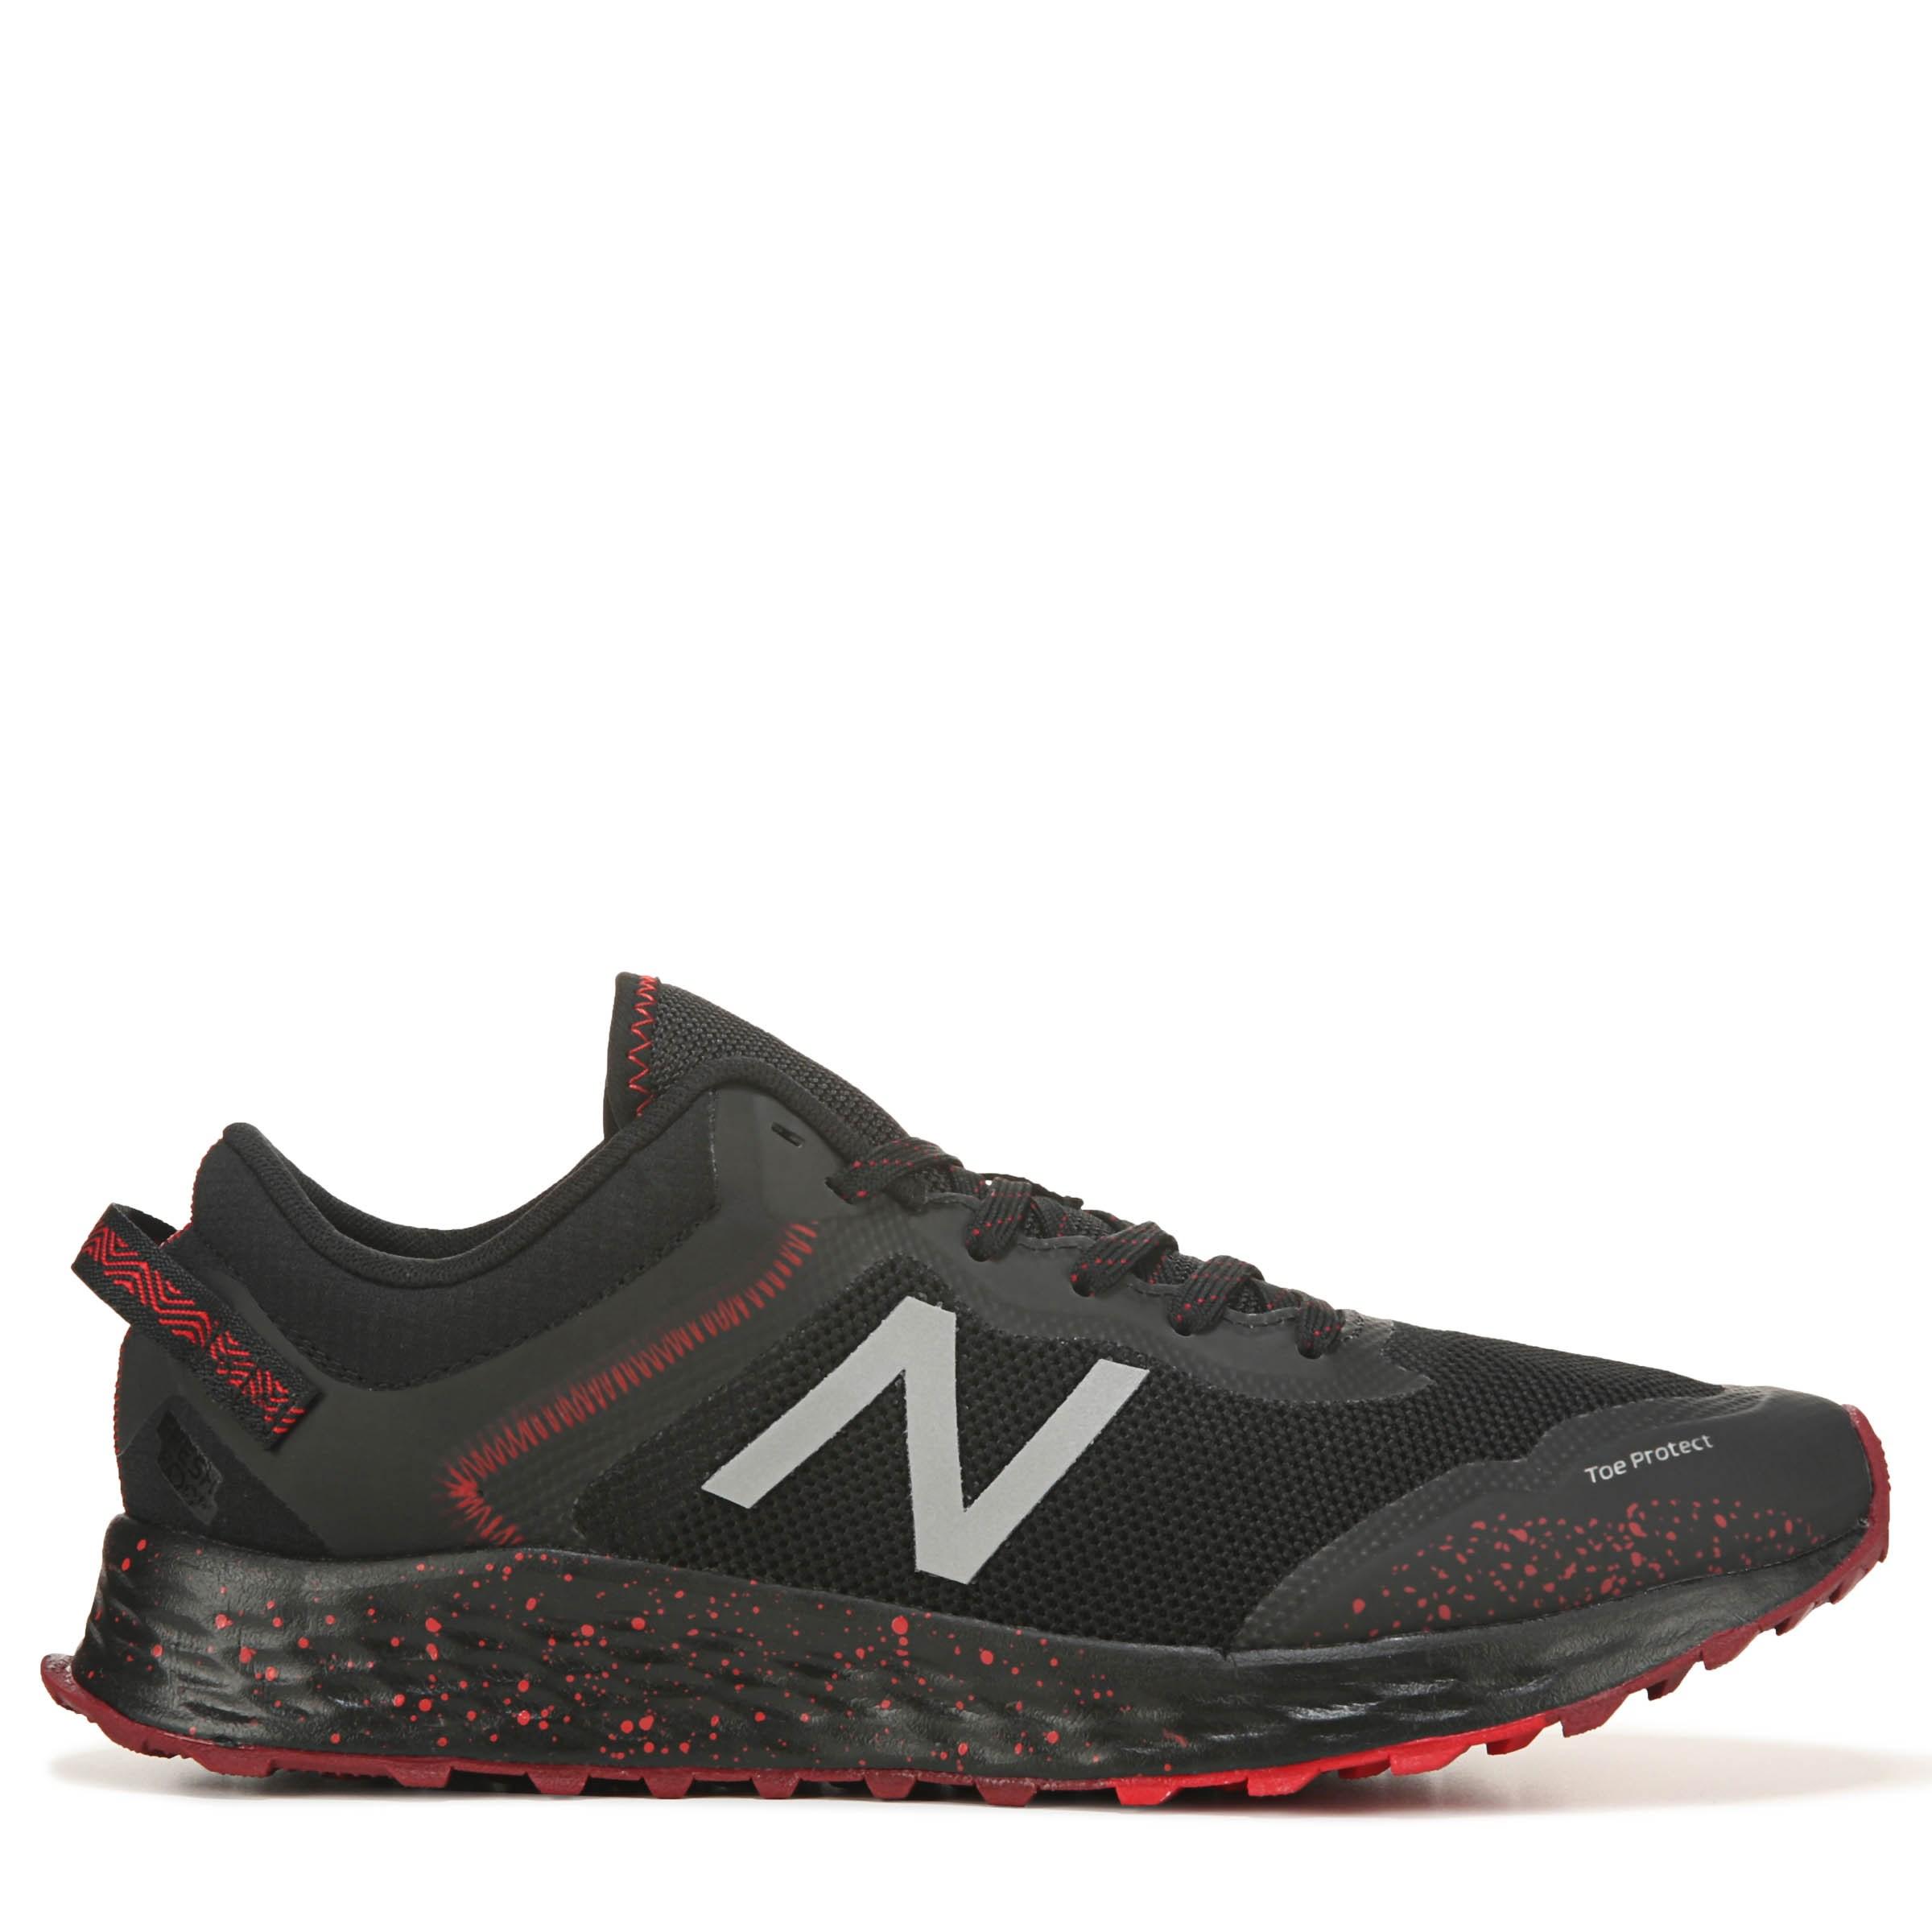 New Balance Arishi Trail Running Shoes in Black/Red (Black) for Men - Lyst